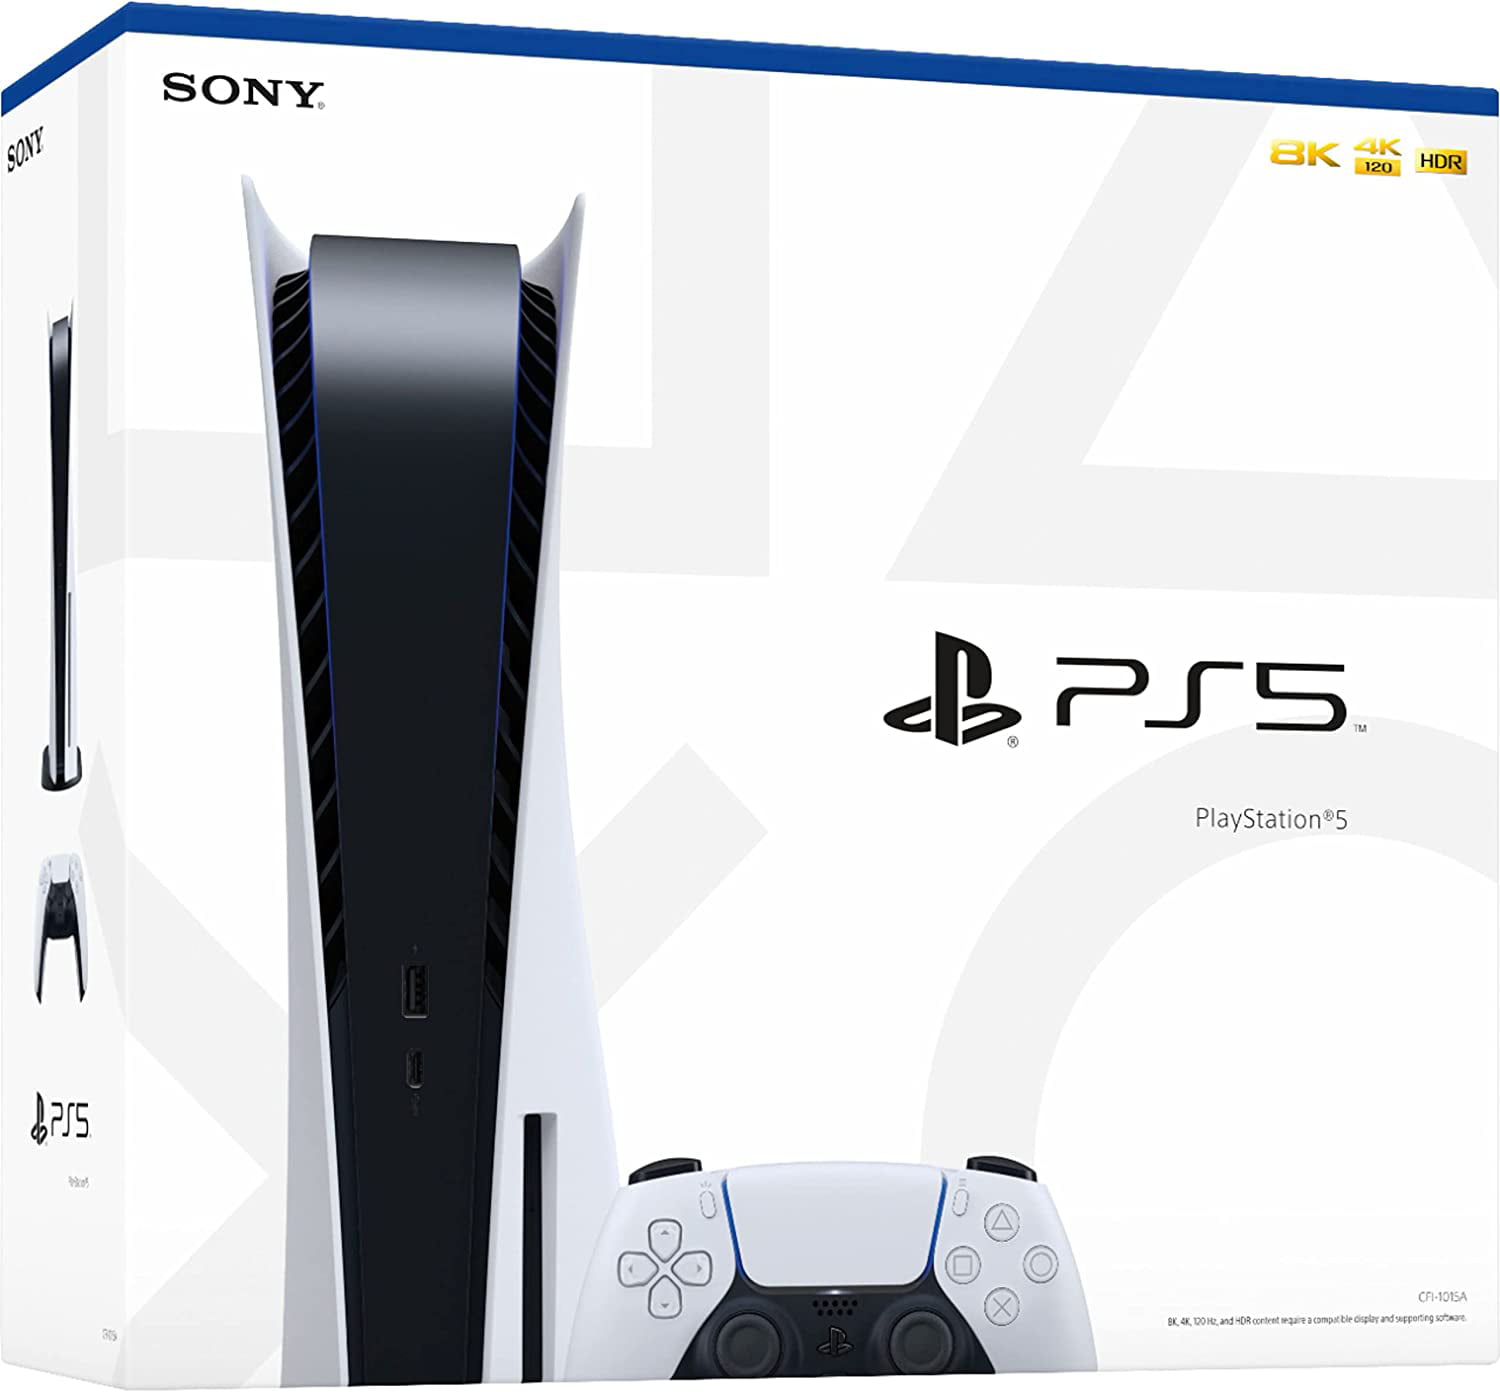 Sony refreshes PlayStation 5 (PS 5) gaming console with sleek